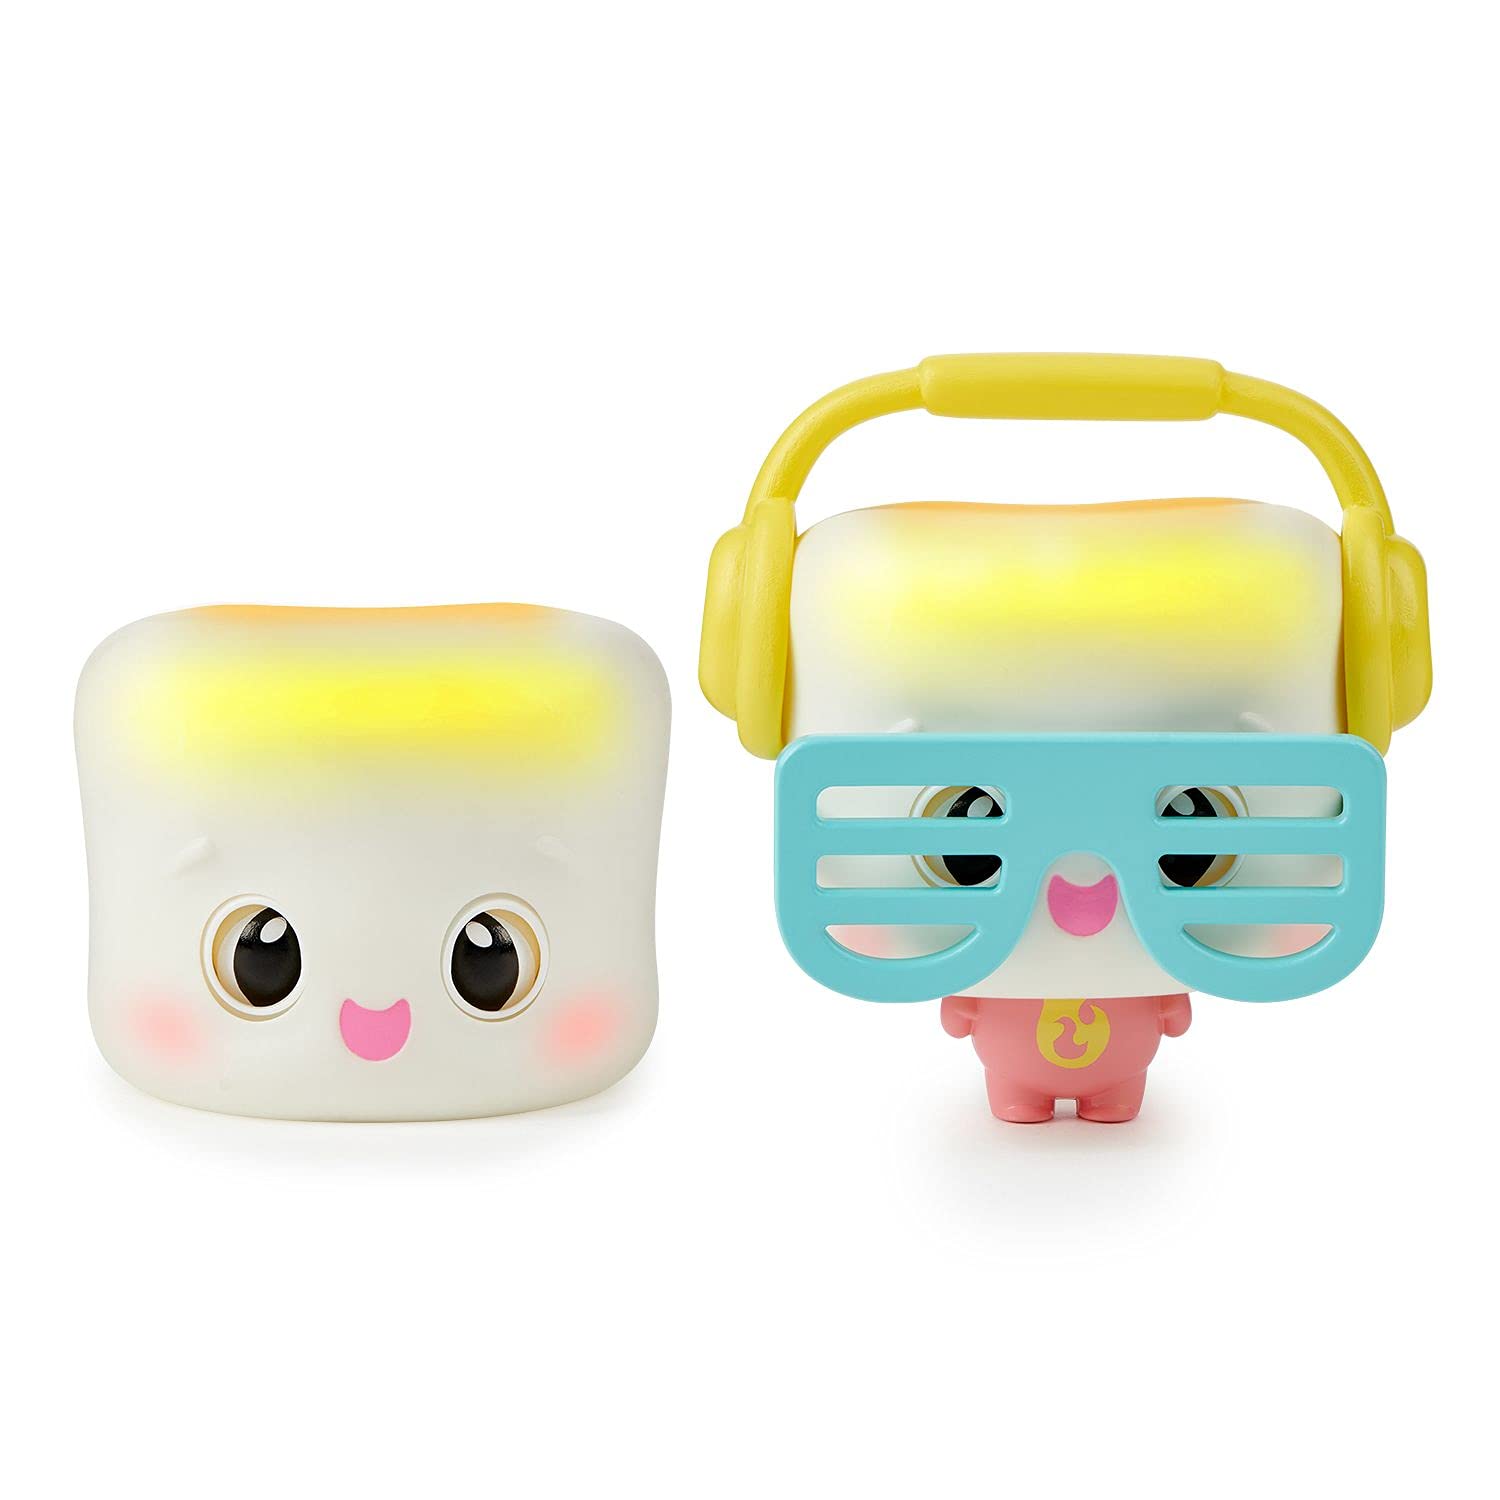 My Squishy Little Marshmallow Interactive Doll w/ Lights, Sounds & Accessories (Mel)  $3.58 + Free Shipping w/ Prime or on $25+